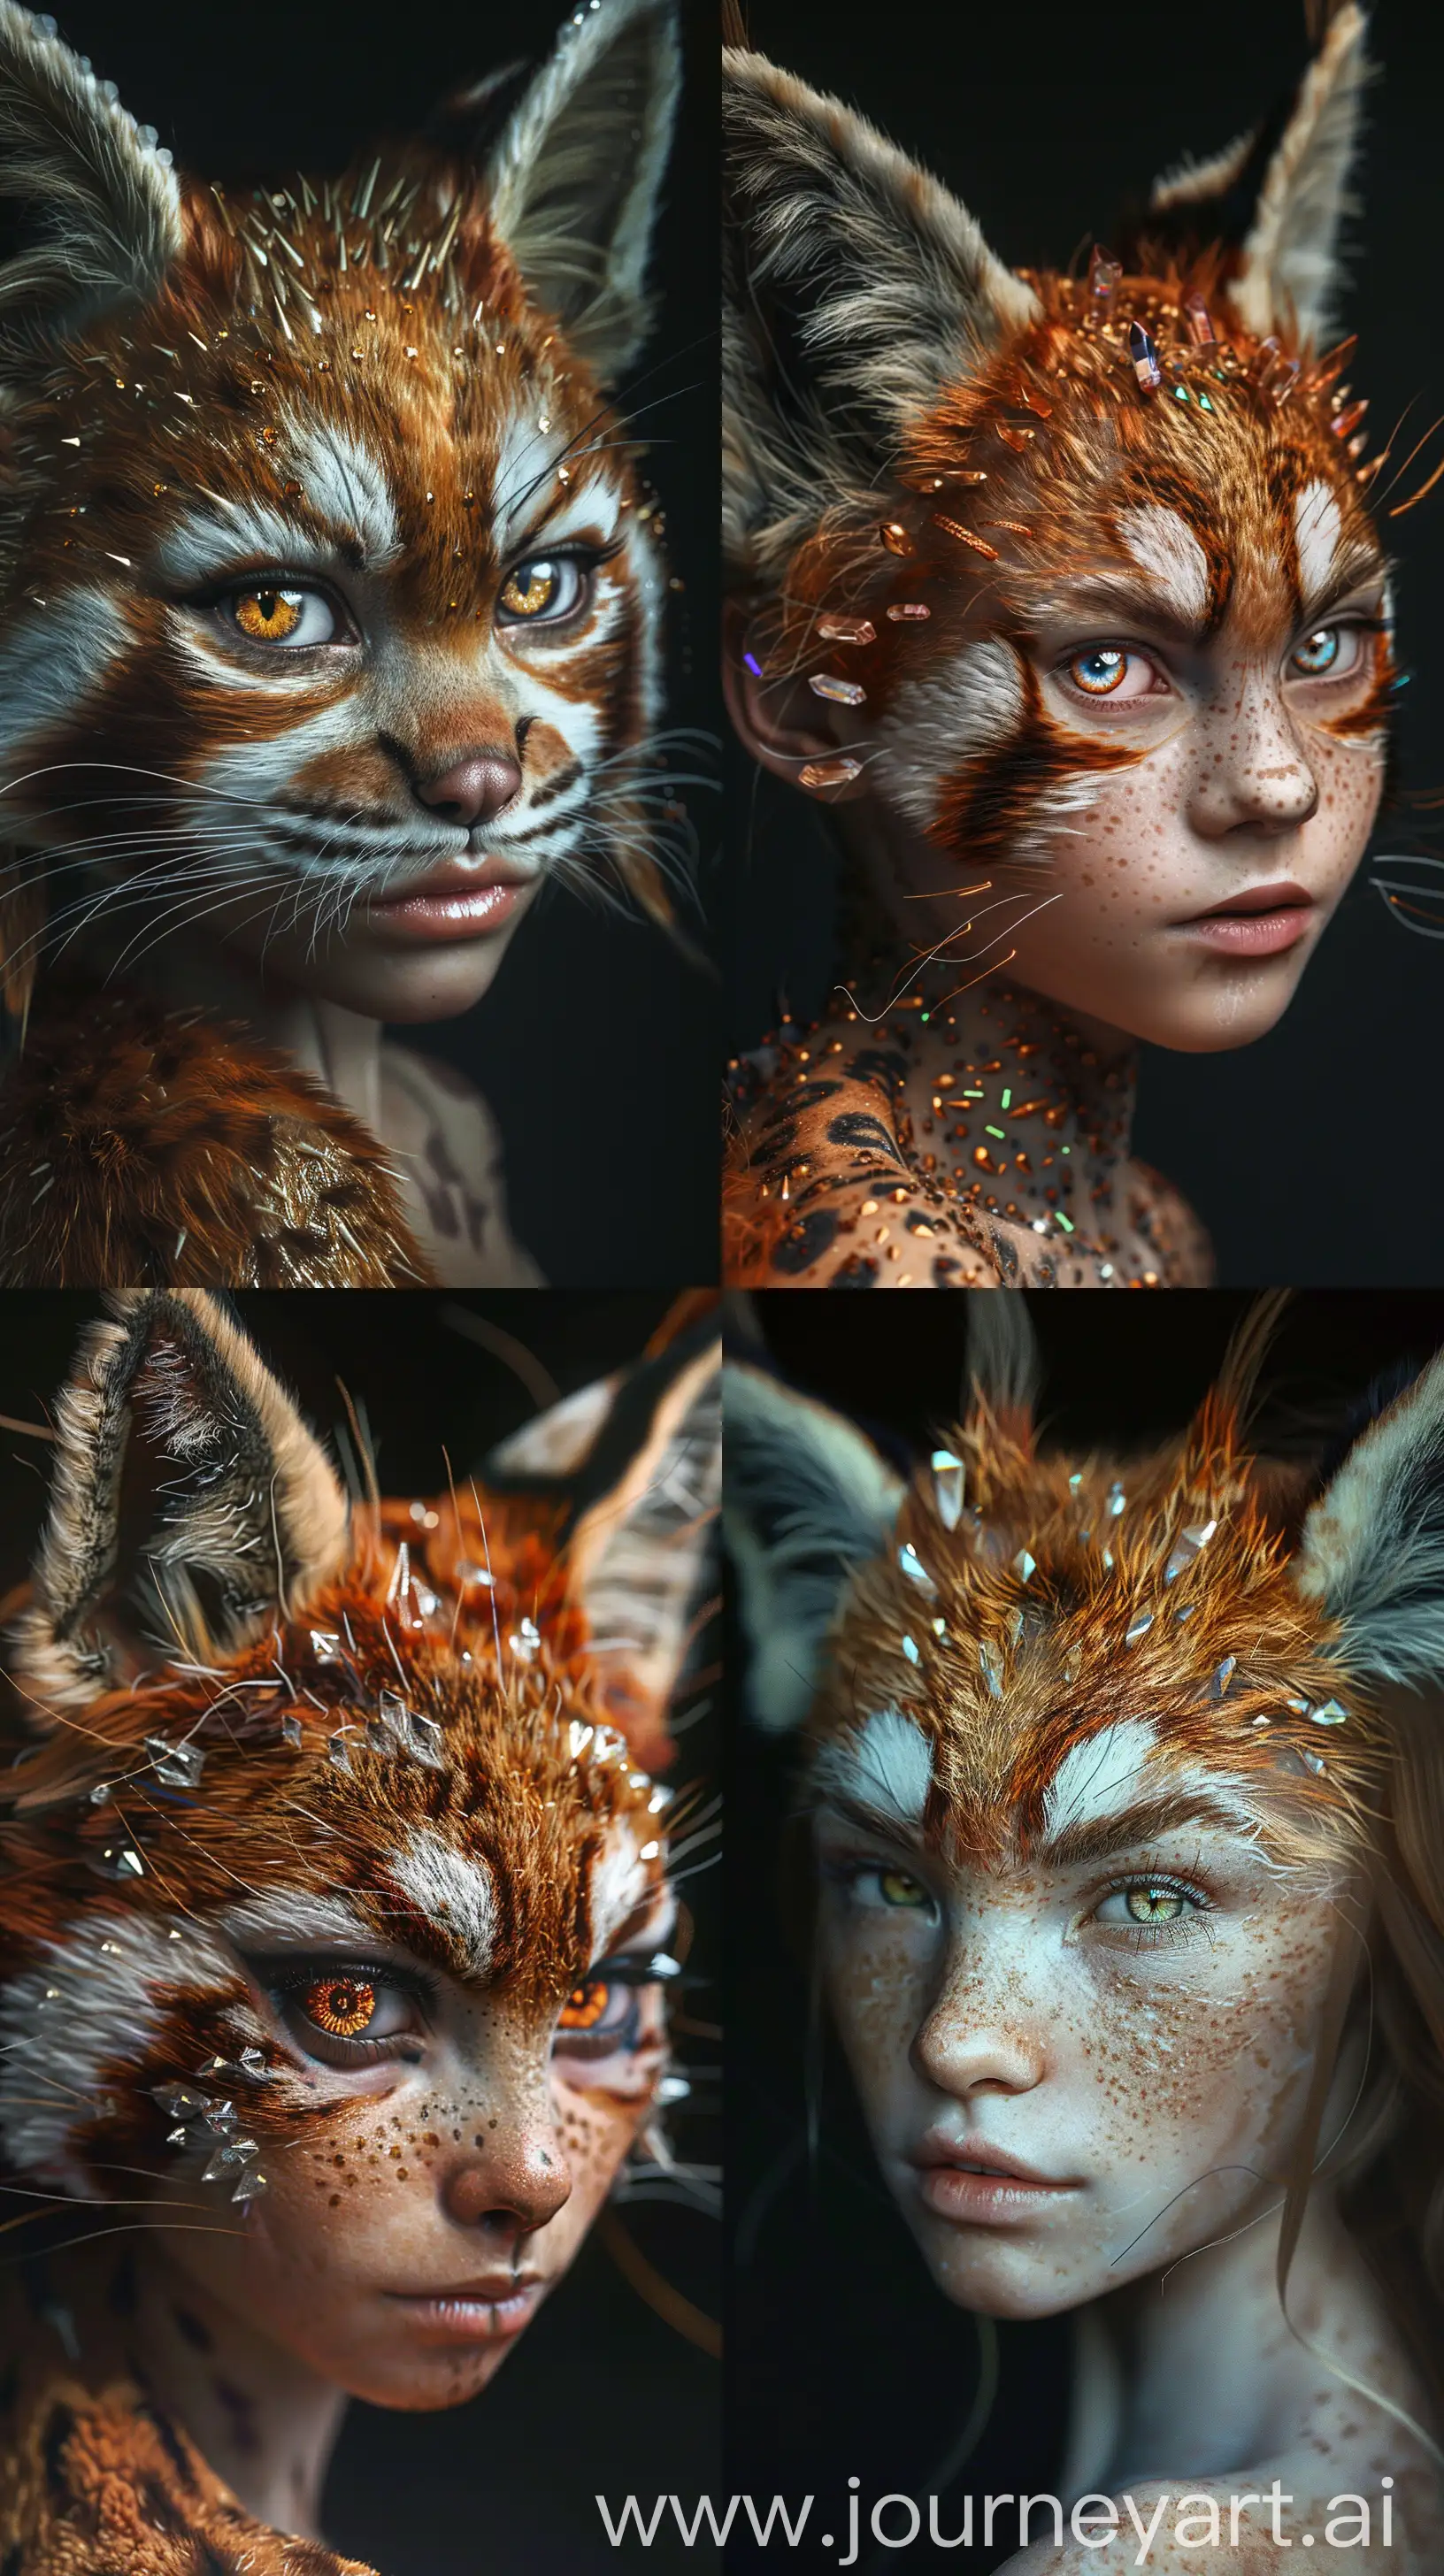 Create tyrolean close-up of a genetically modified girl who is part human, part red panda and lynx. She has stunningly beautiful, bright, cat-like, crystal-colored eyes and skin like a Bengal cat. Her face is feminine like a Miss World, her ears are shaped like a big cat.
The colors are warm and the lighting is dramatic. Tyrolean Studio Photo Award, taken against a suitable black background --ar 9:16 --q 1 --s 100